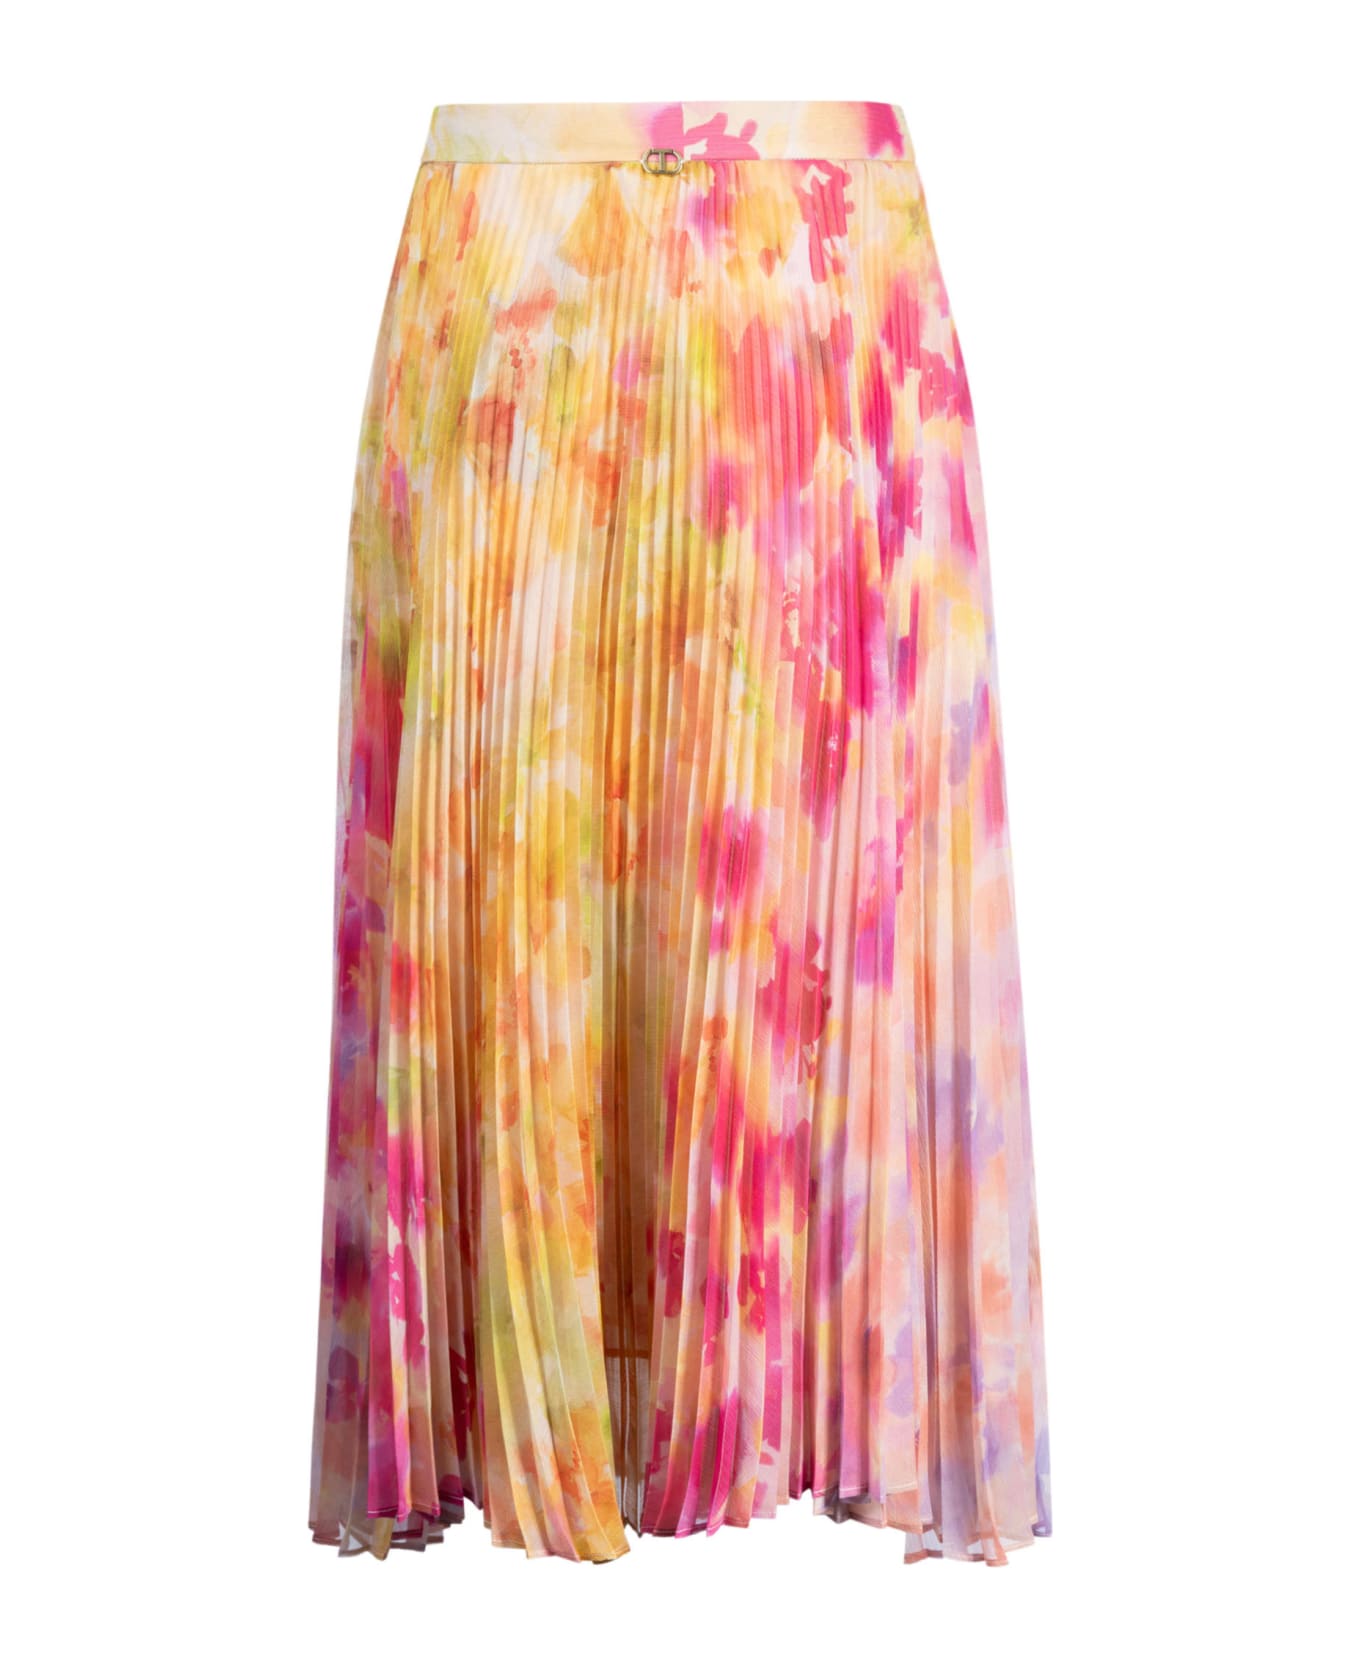 TwinSet Printed Floral Pleated Skirt - Multicolor